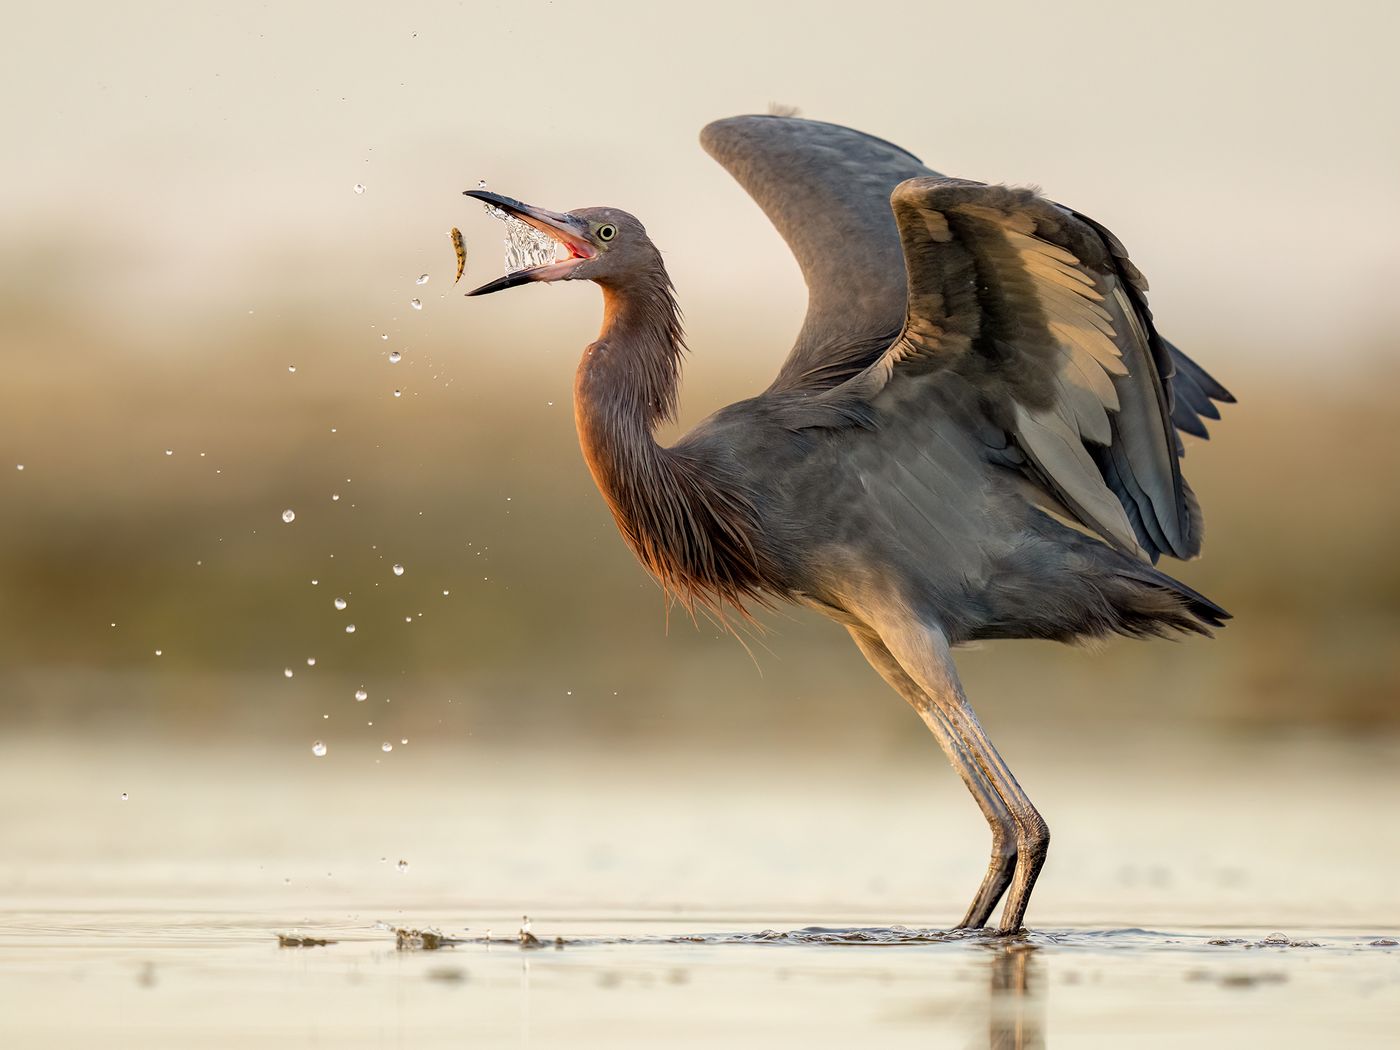 A Reddish Egret stands in shallow water against a blurred yellow background, its body facing left and its wings open behind it. A small fish and water droplets are suspended in the air in front of the bird’s open bill.